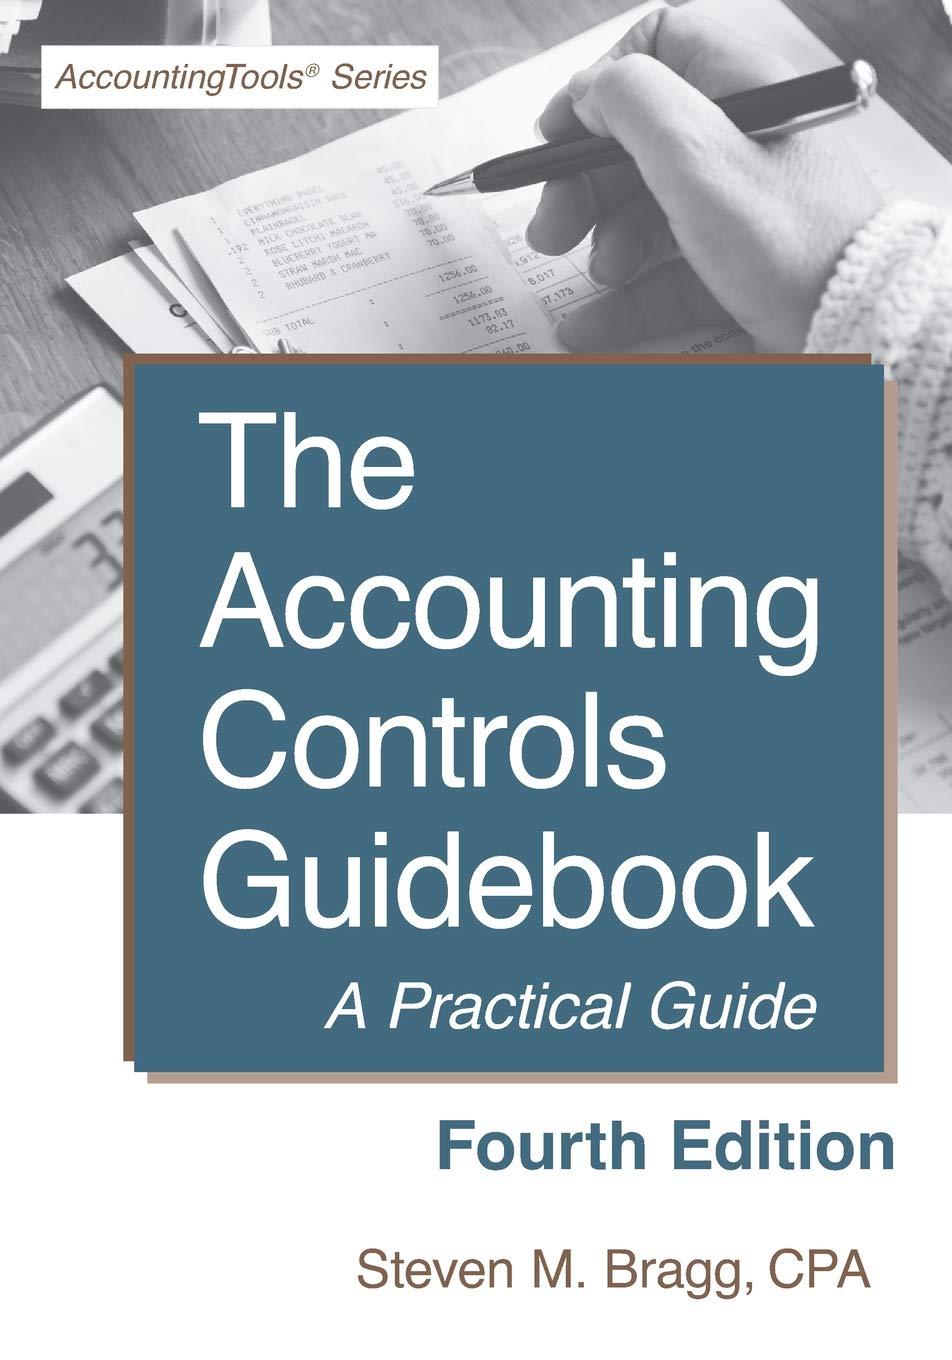 the accounting controls guidebook a practical guide 4th edition steven m. bragg 1642210080, 978-1642210088